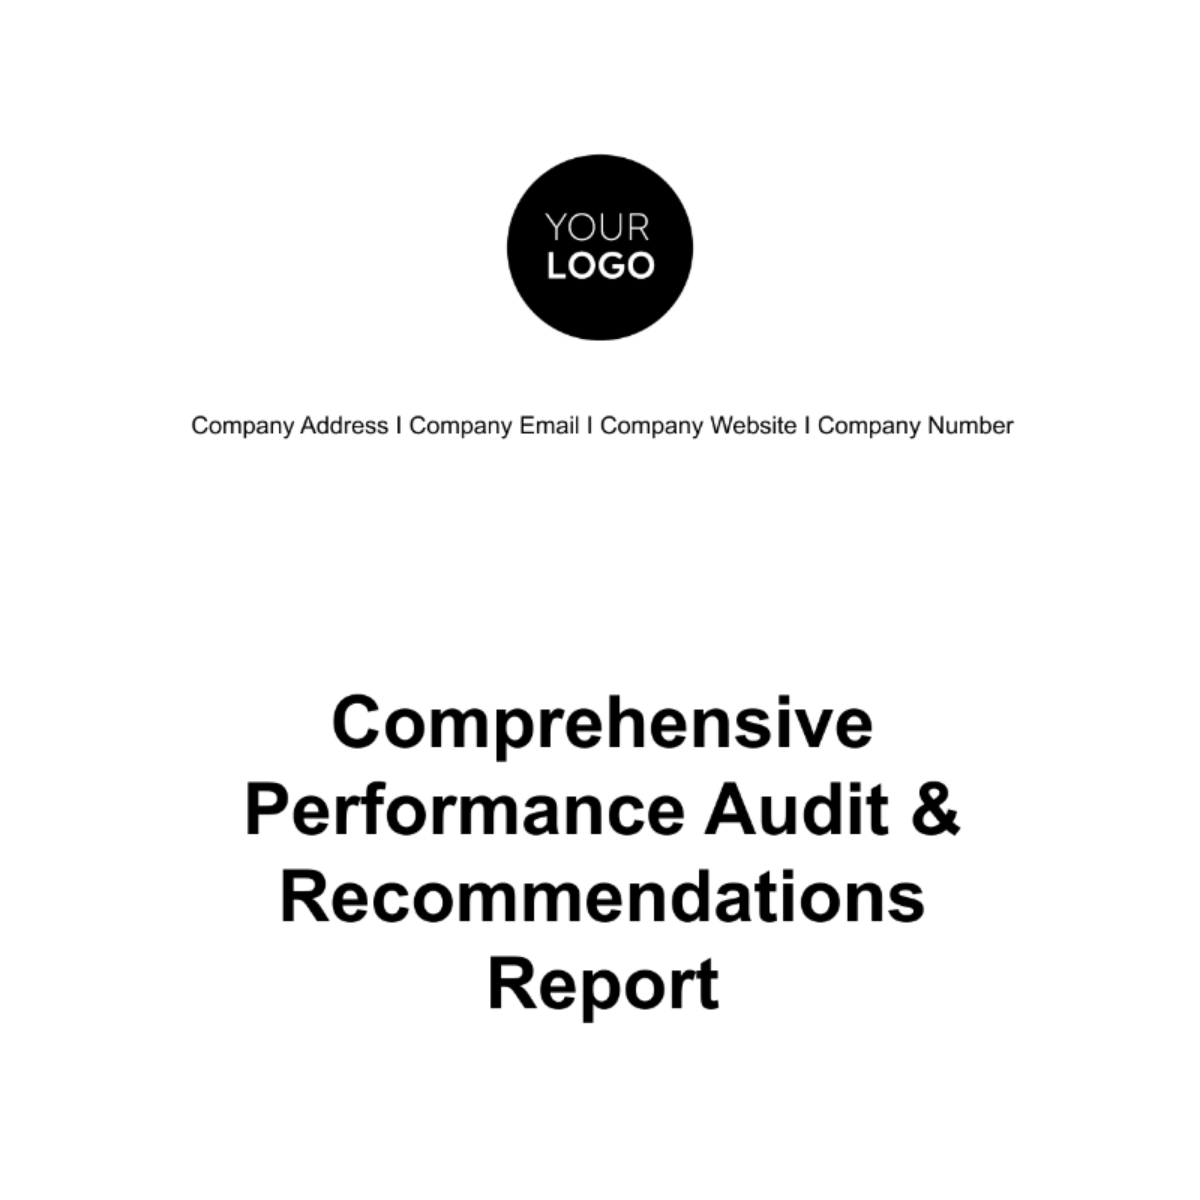 Free Comprehensive Performance Audit & Recommendations Report HR Template